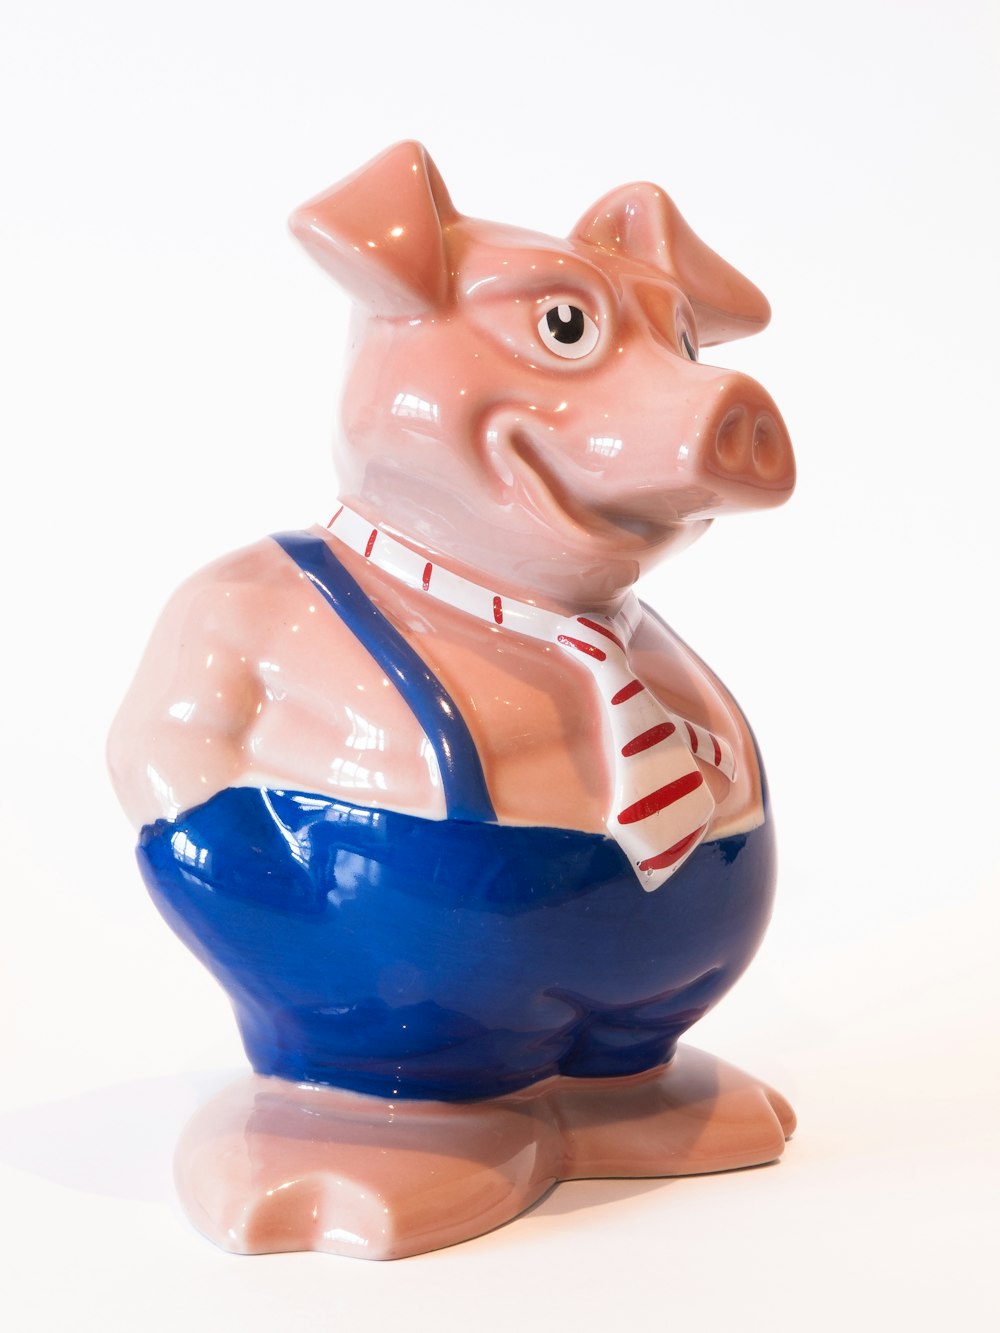 a ceramic pig figurine with a tie on